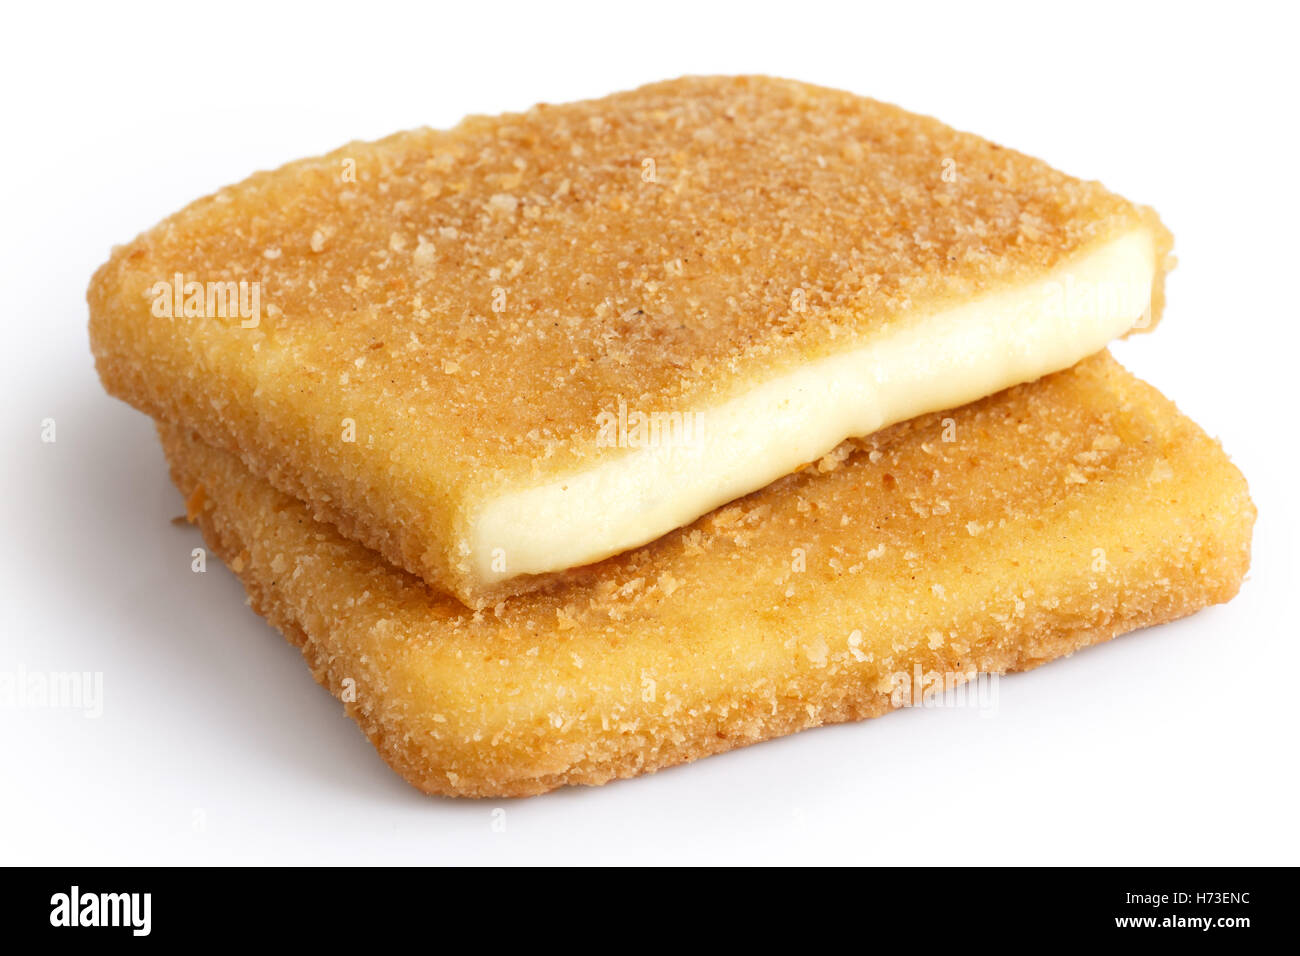 Square golden fried cheeses isolated, cut and melting. Stock Photo